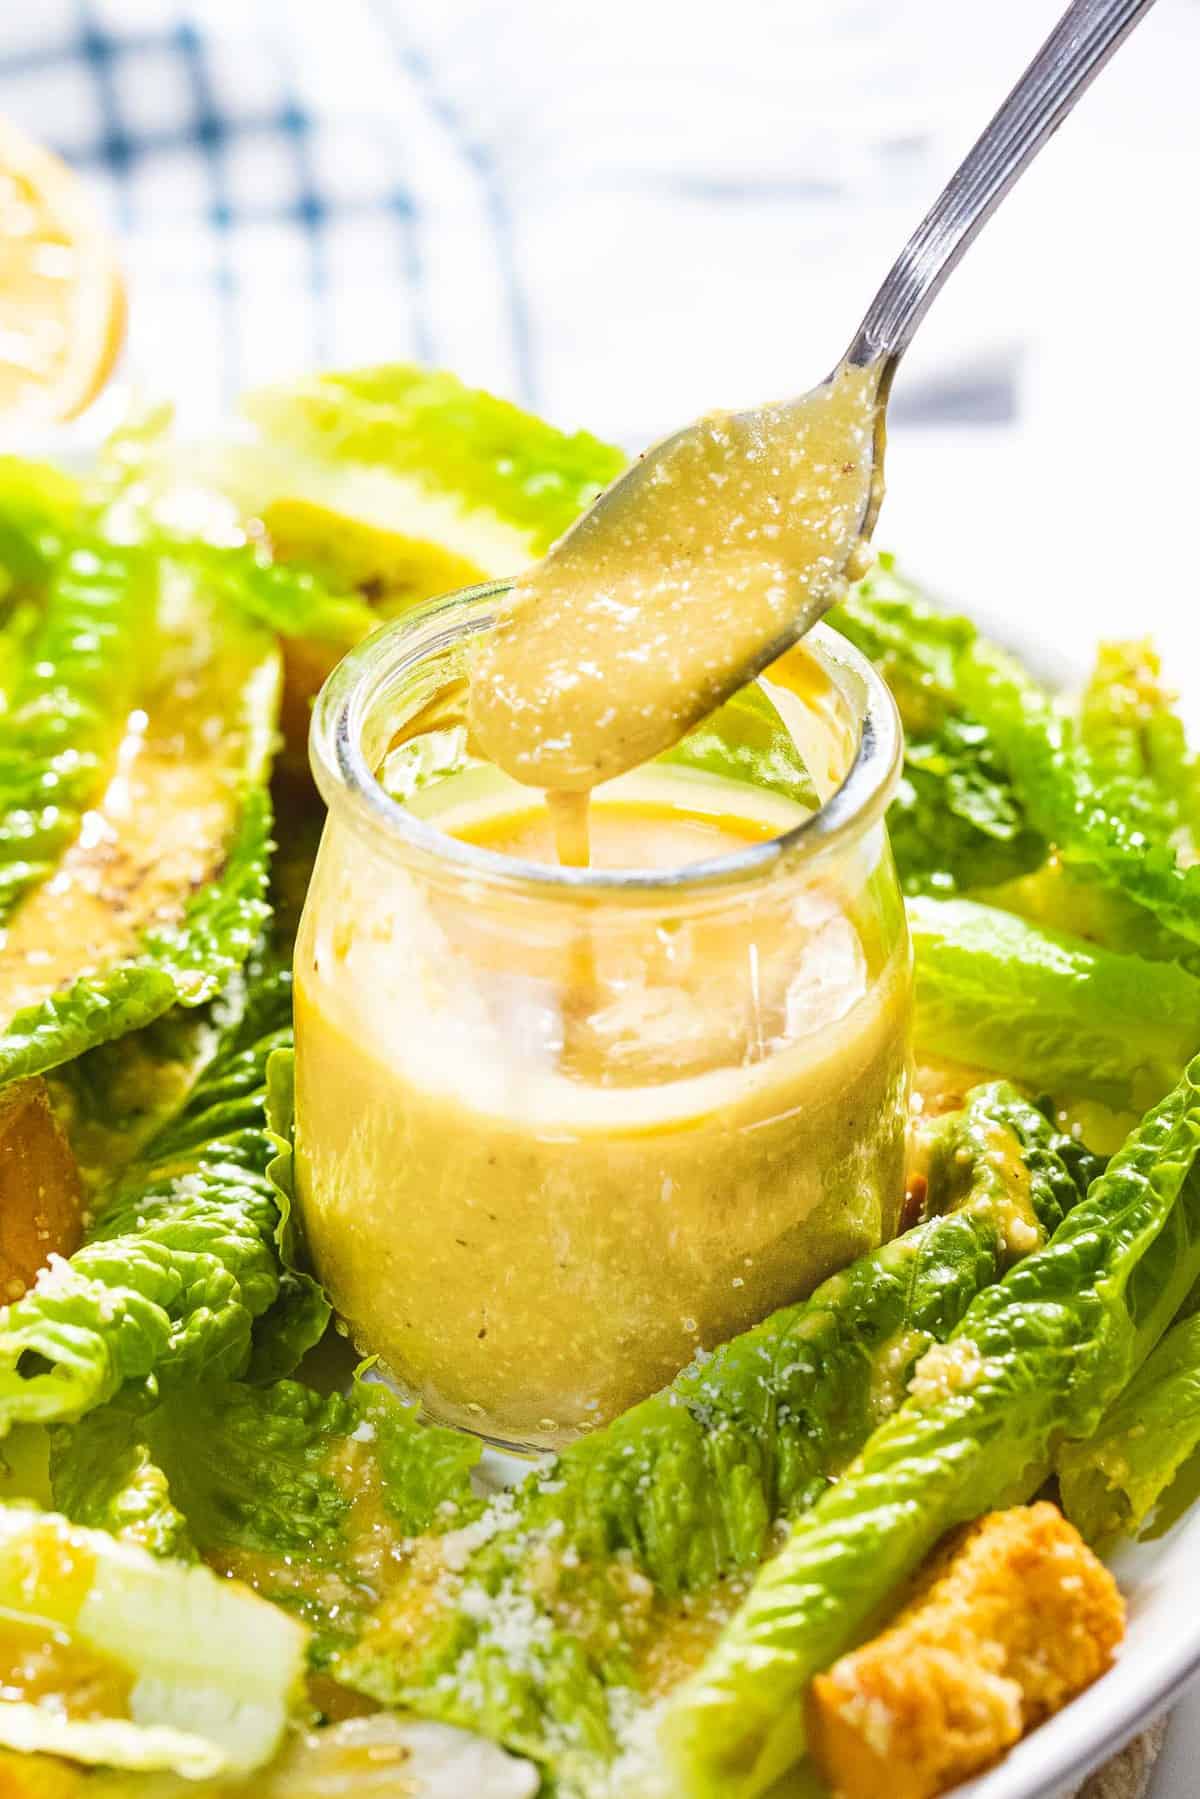 Homemade Caesar salad dressing dripping off a spoon next to romaine lettuce.